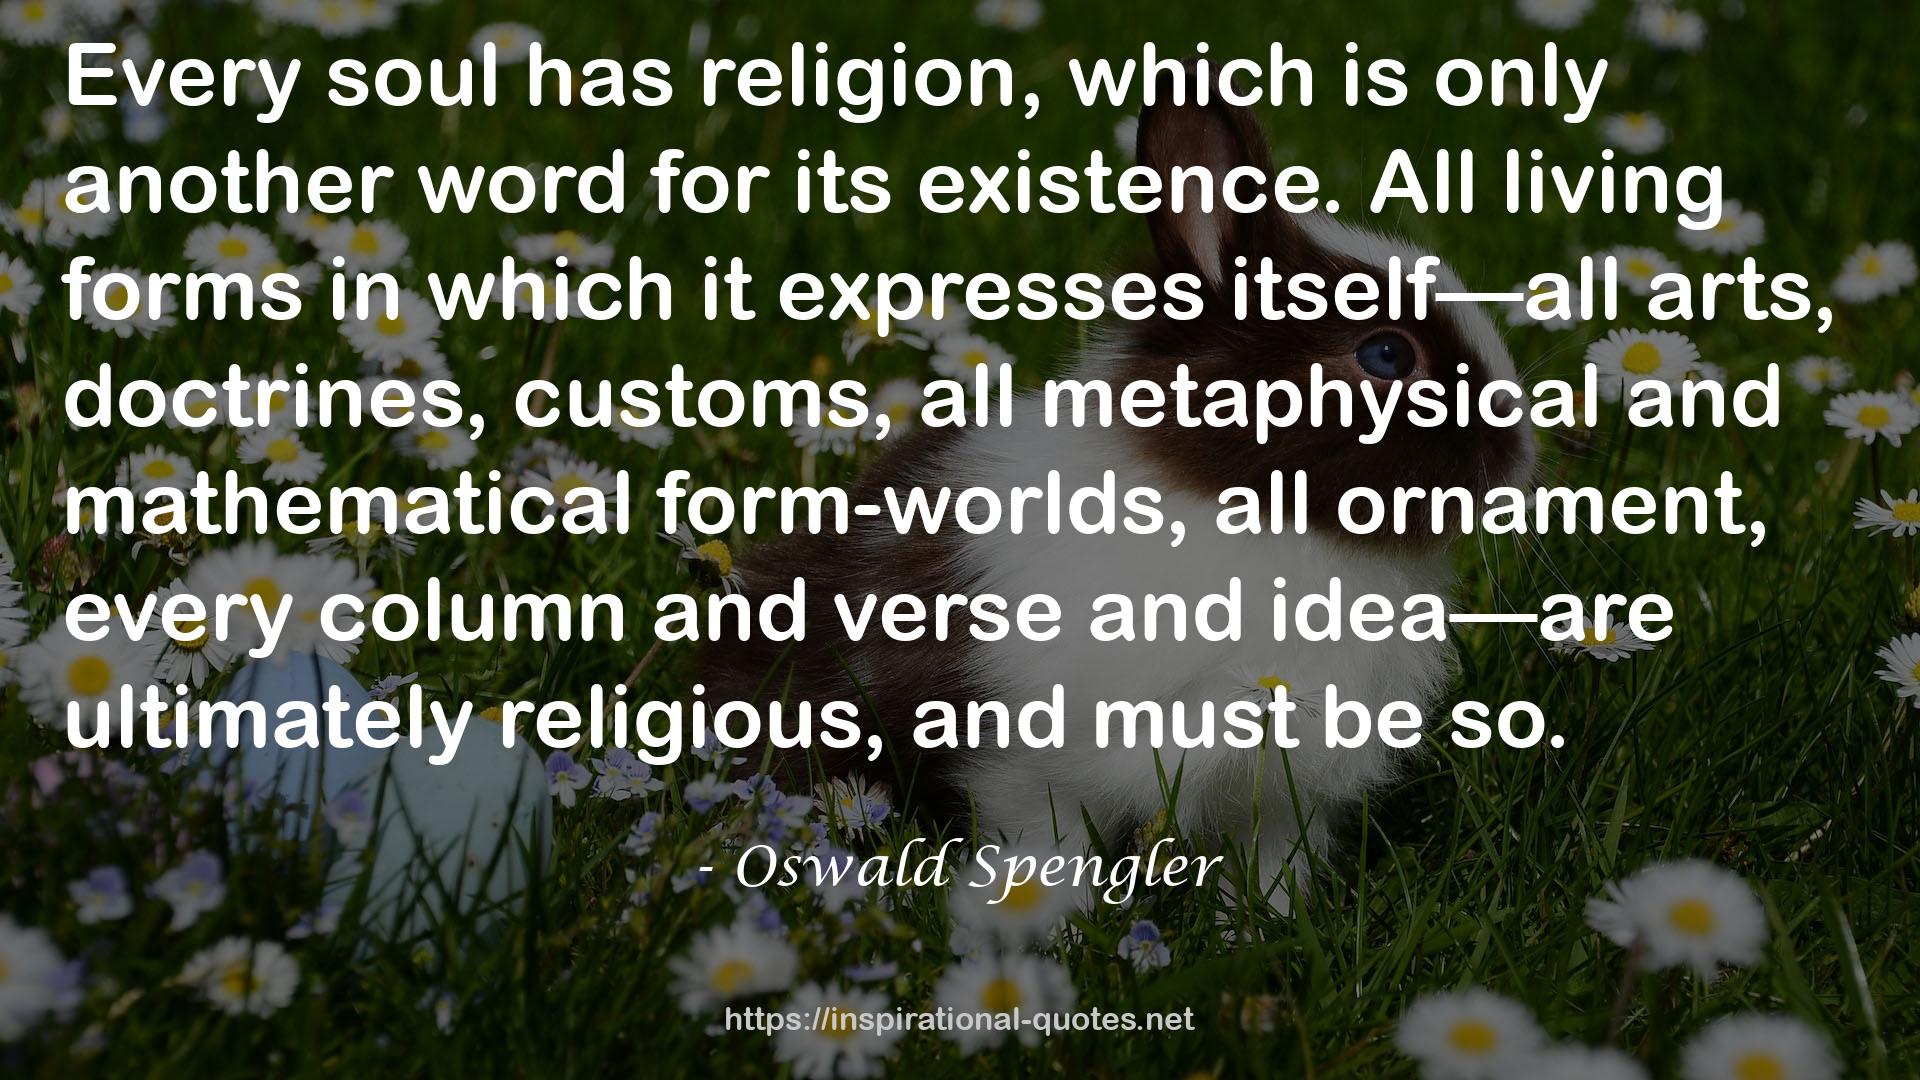 Oswald Spengler QUOTES